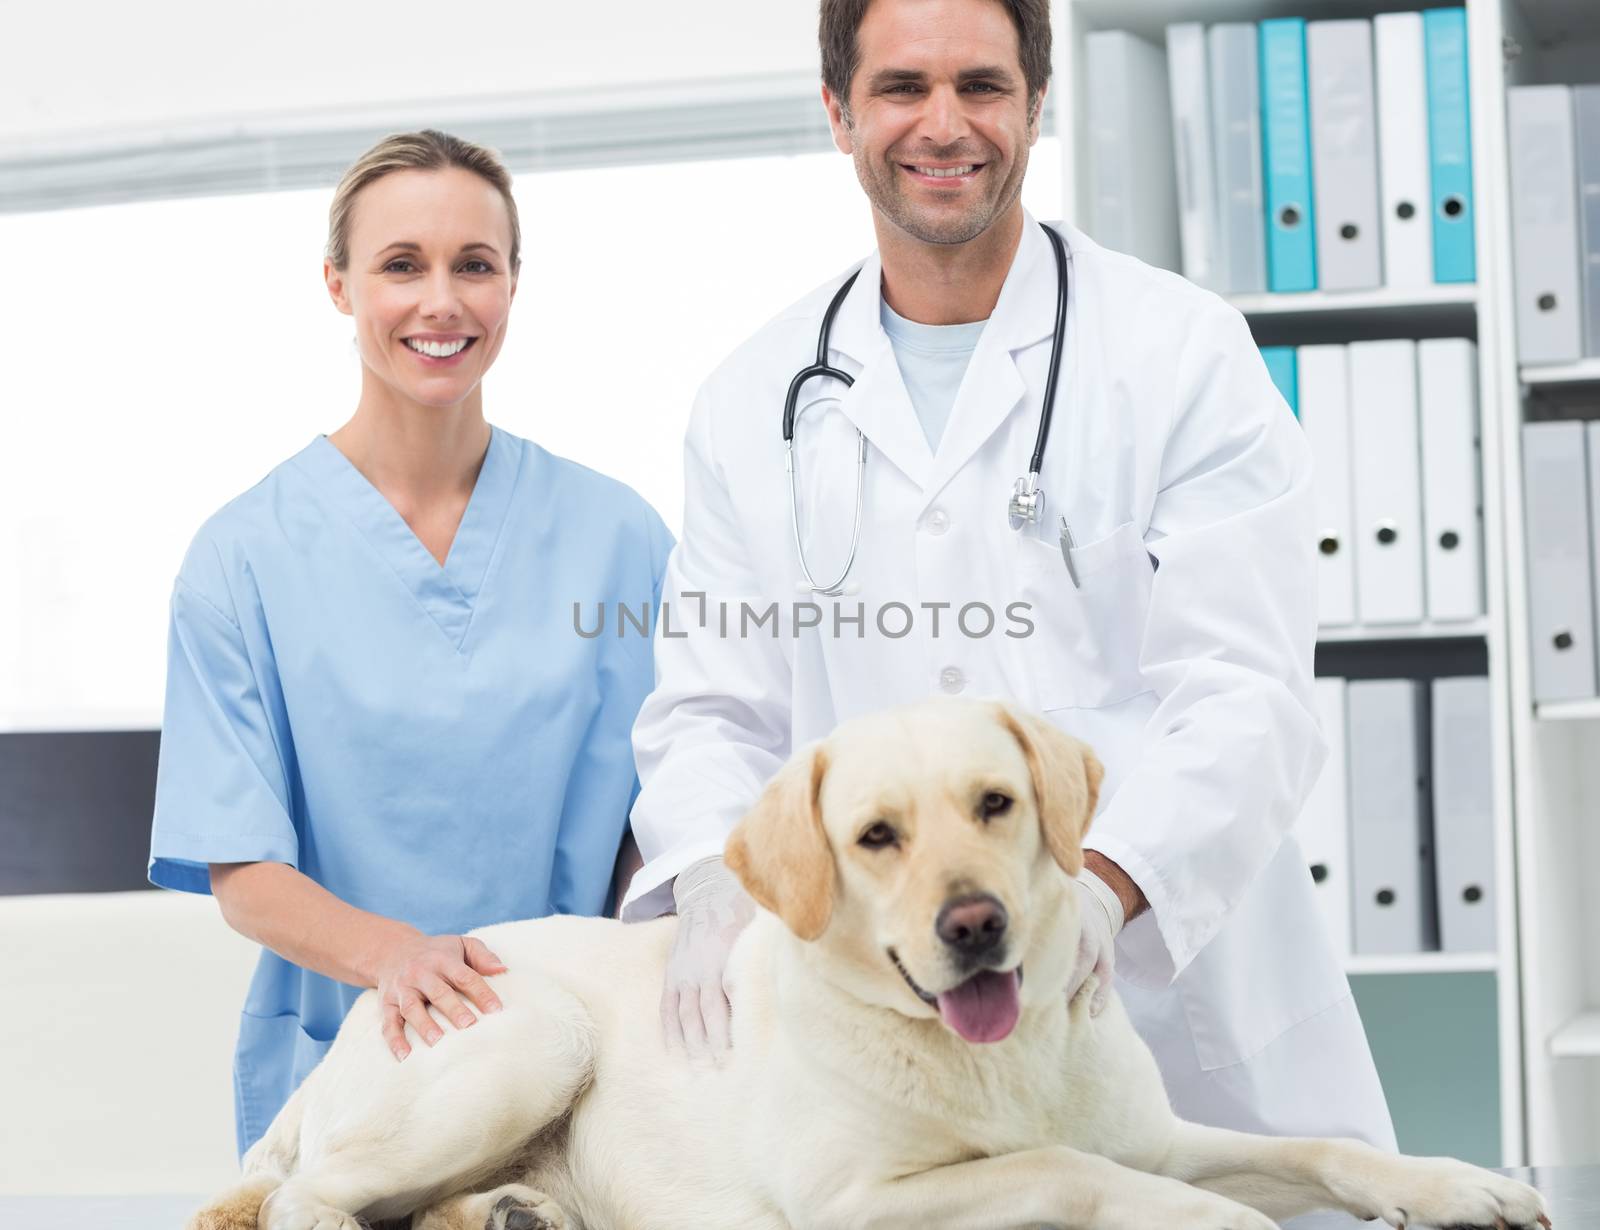 Portrait of confidence veterinarians with dog in clinic